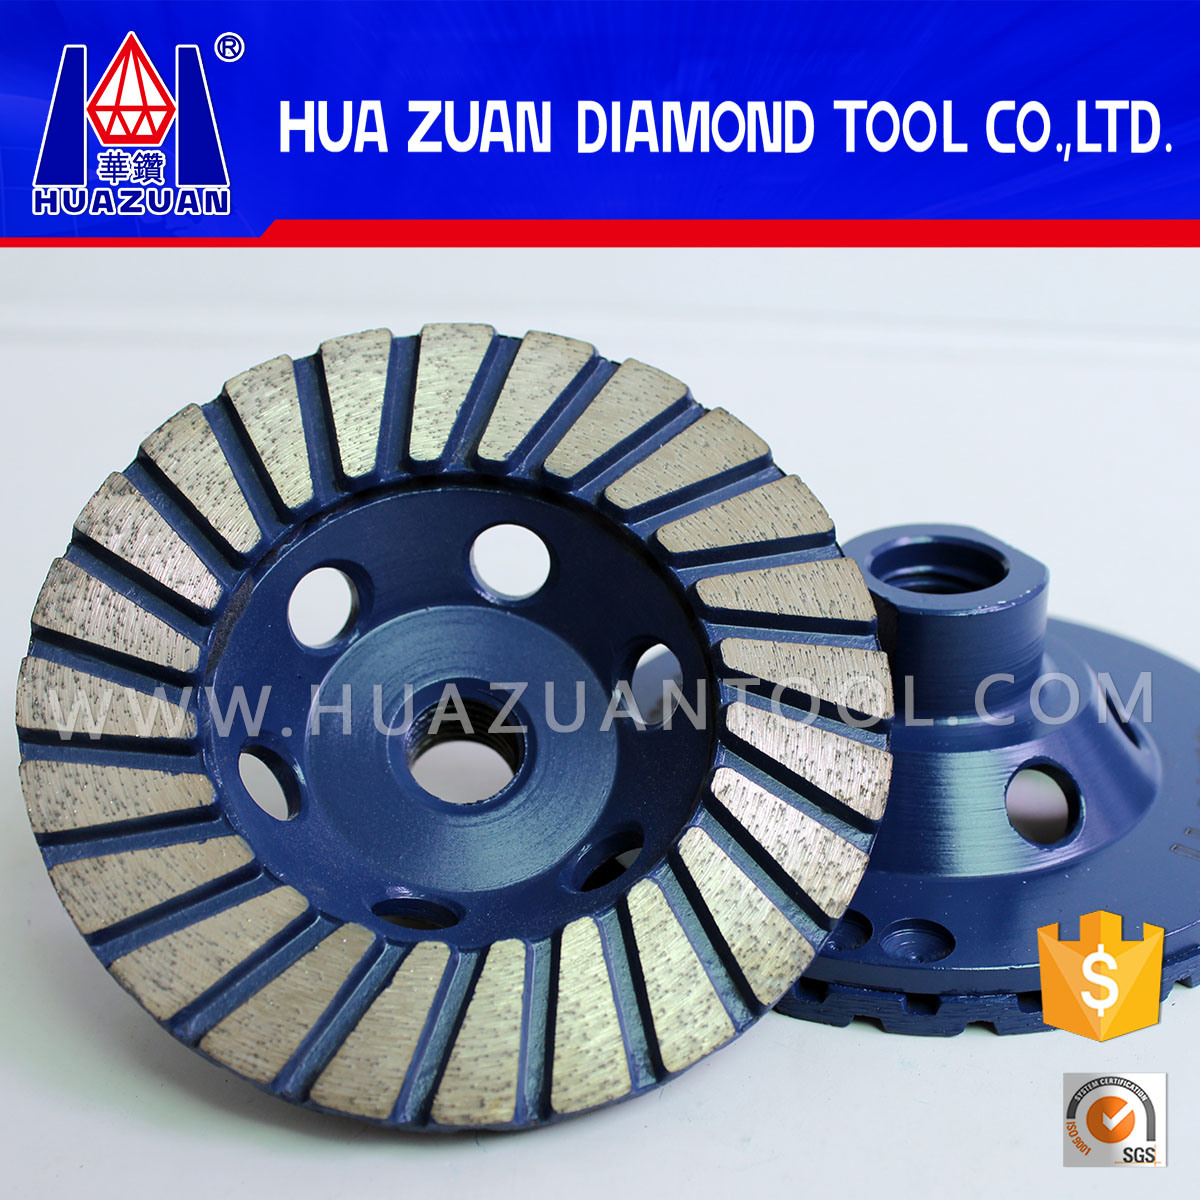 Diamond Turbo Cup Wheel for Grinding Stone